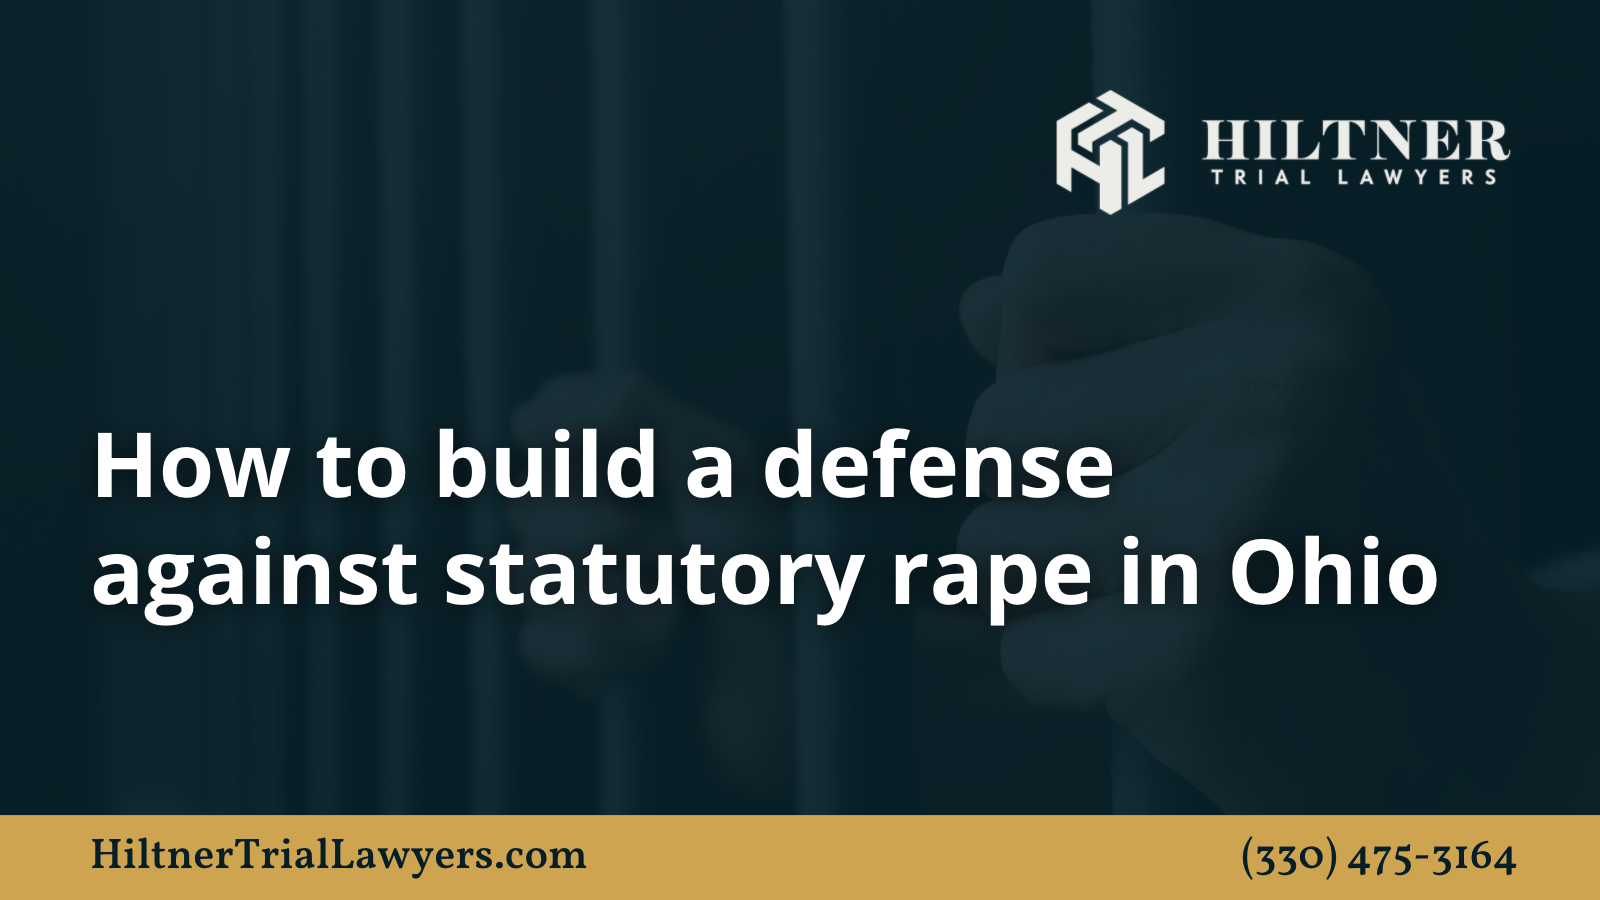 How to build a defense against statutory rape in Ohio - Hiltner Trial Lawyers Ohio - max hiltner